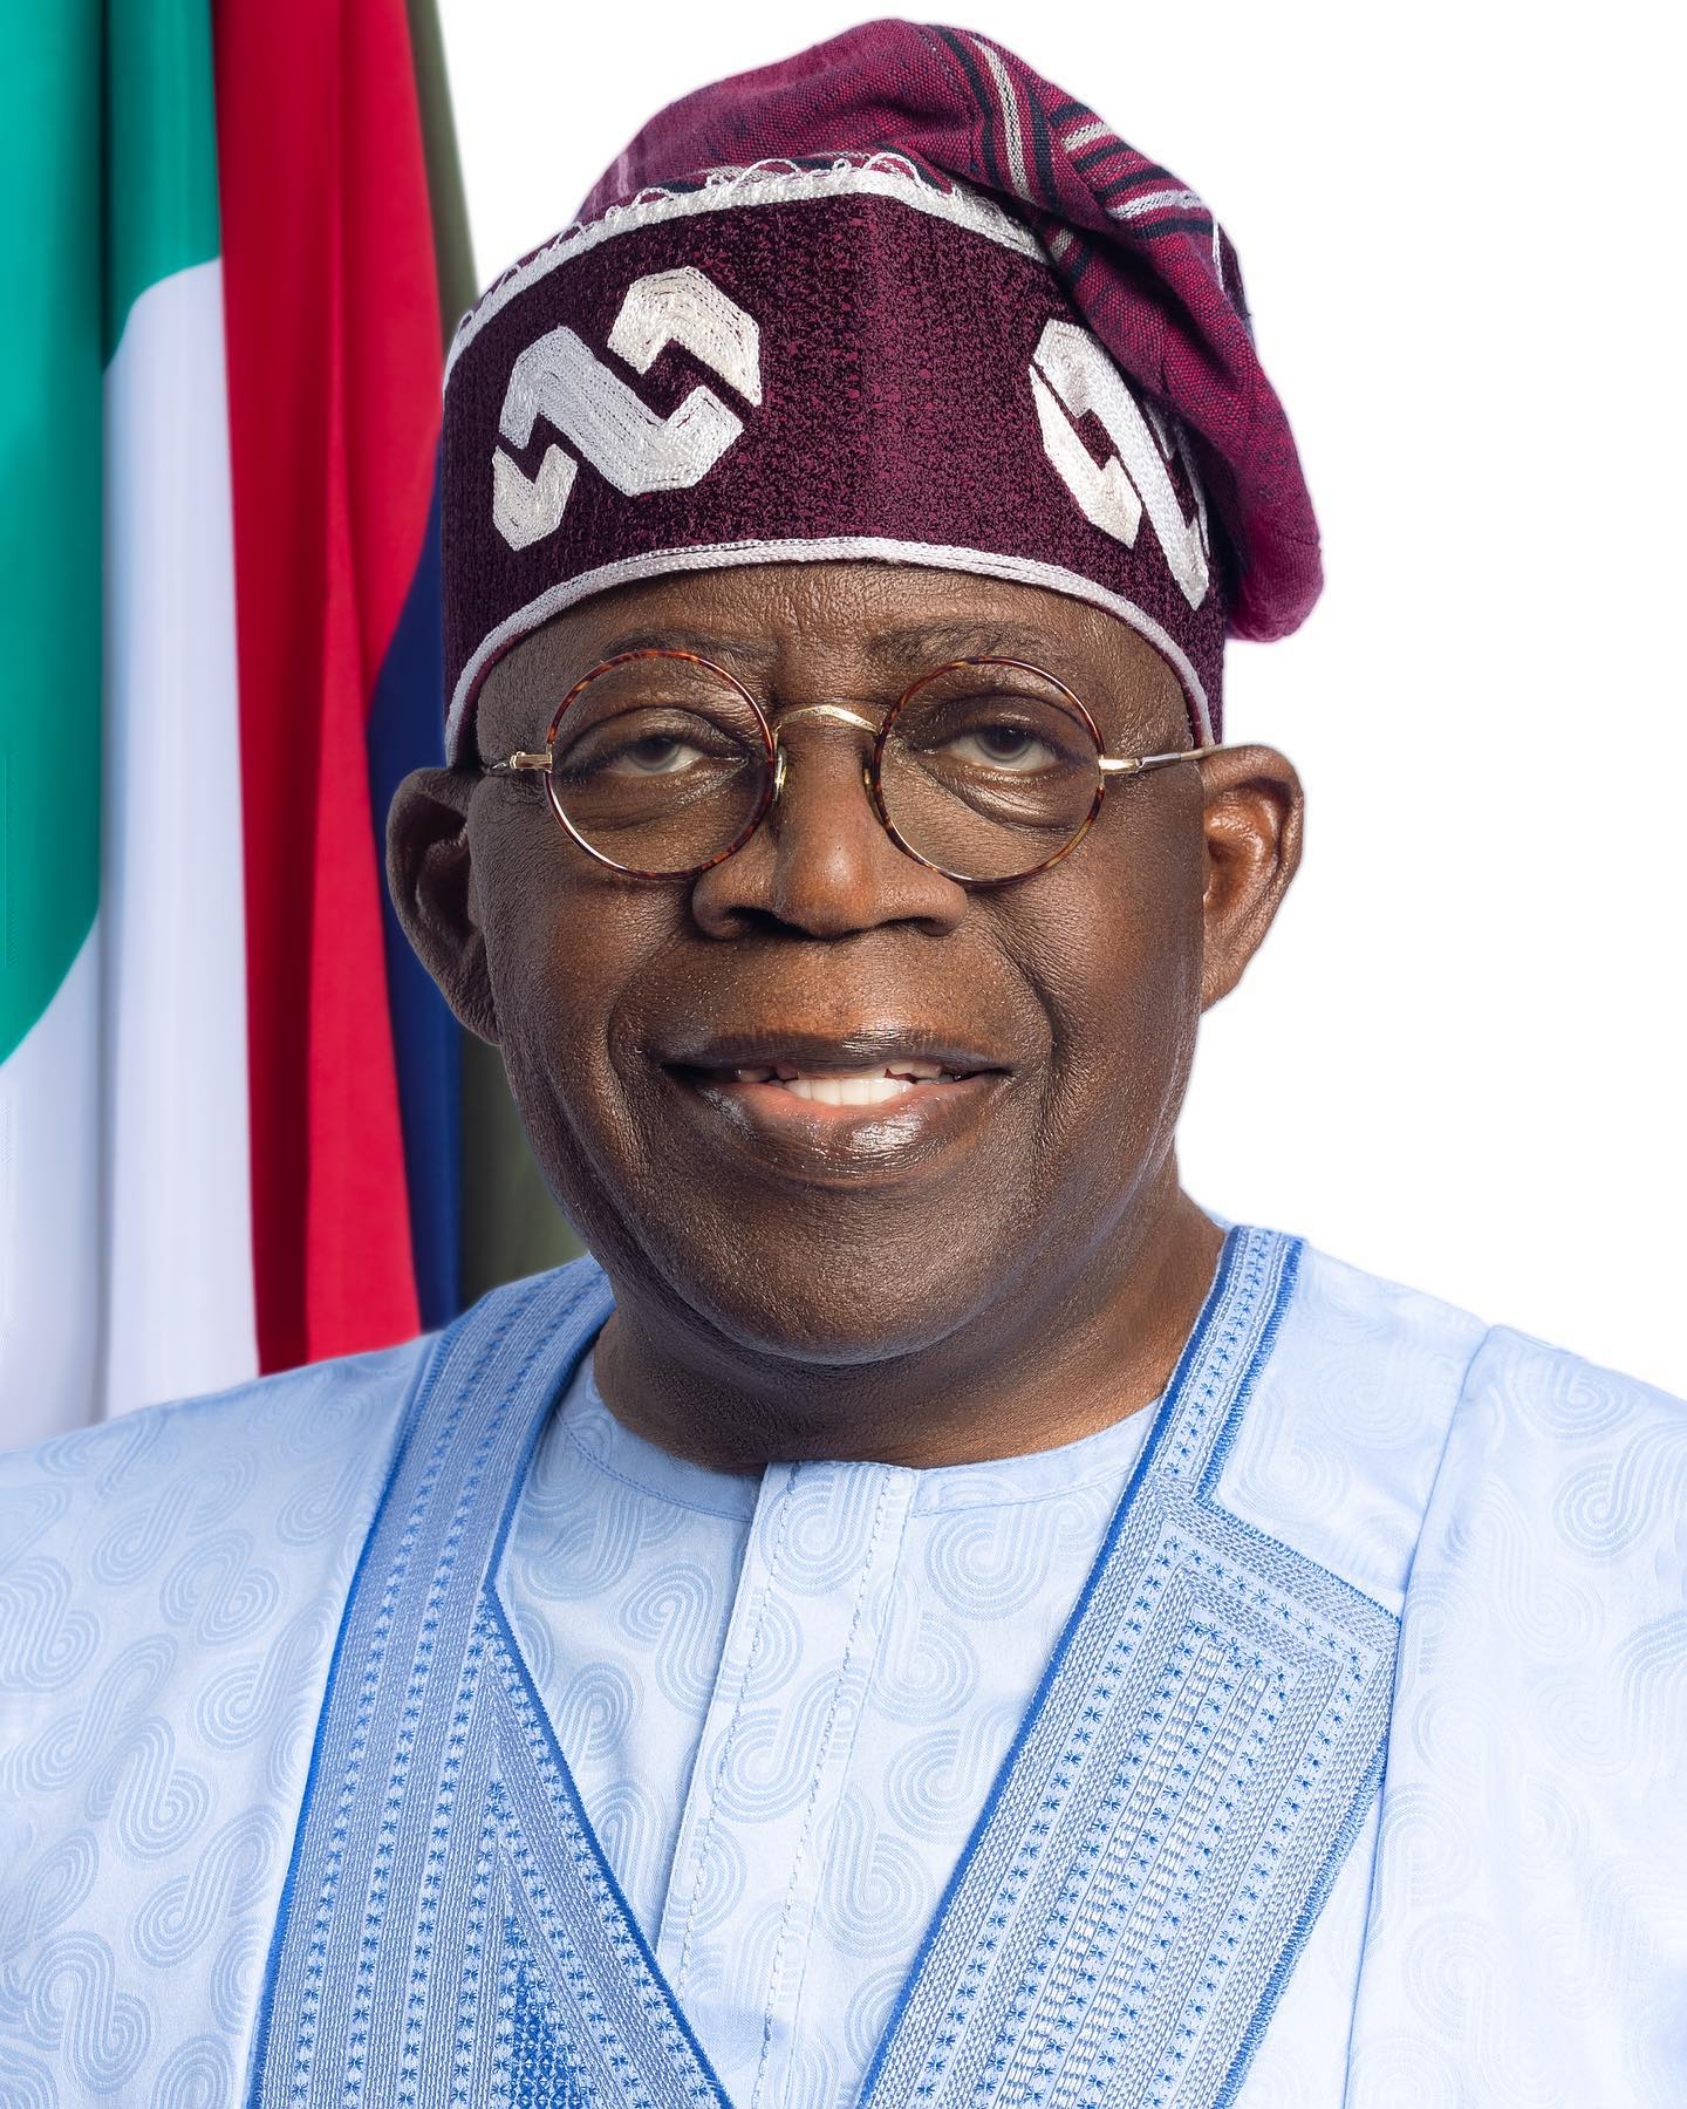 Bola Tinubu Portrait By Nosa Asemota - Own work, CC BY-SA 4.0, https://commons.wikimedia.org/w/index.php?curid=132508469